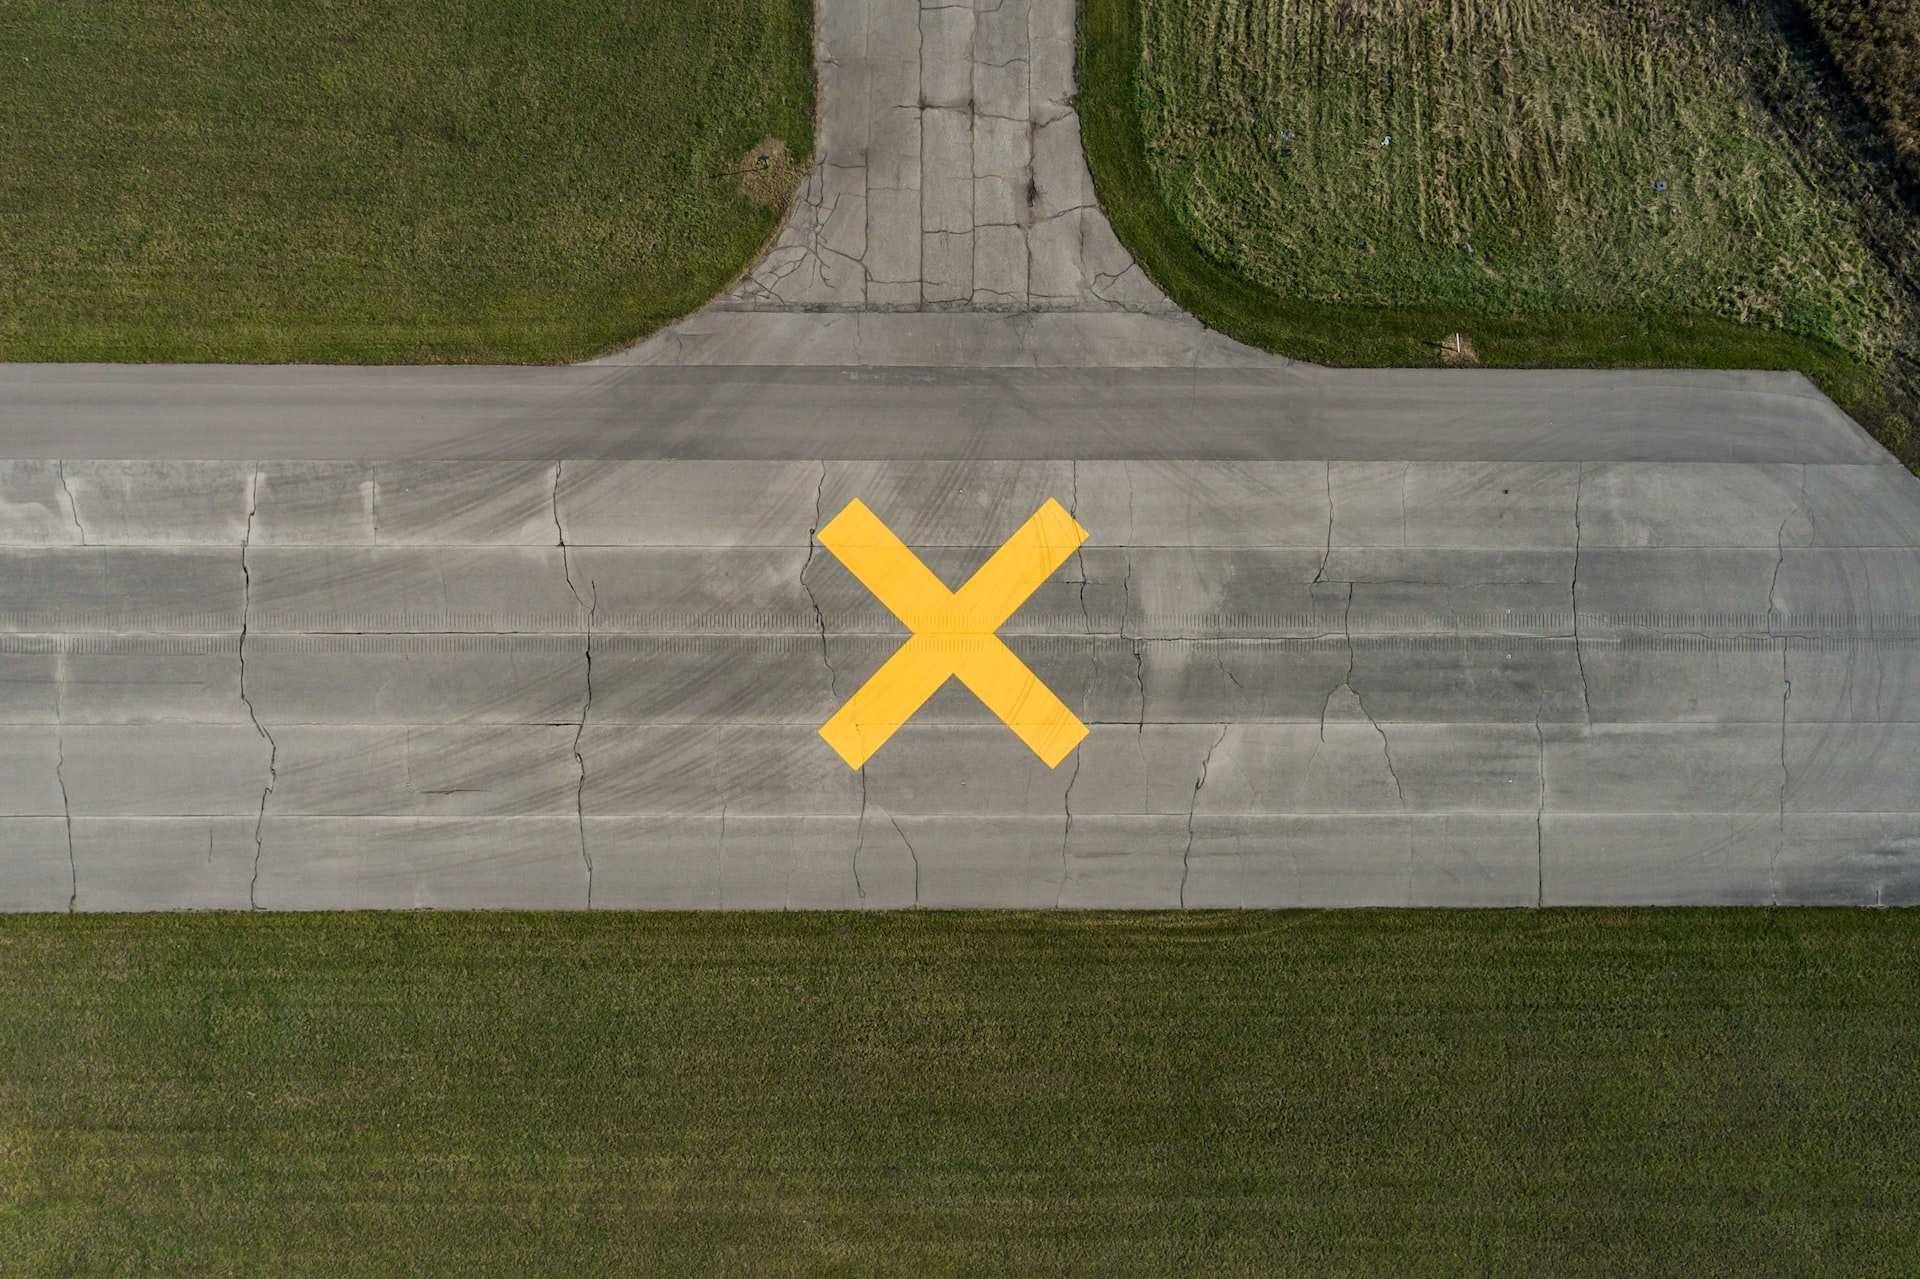 Airport sign denoting a closed runway with a yellow cross.